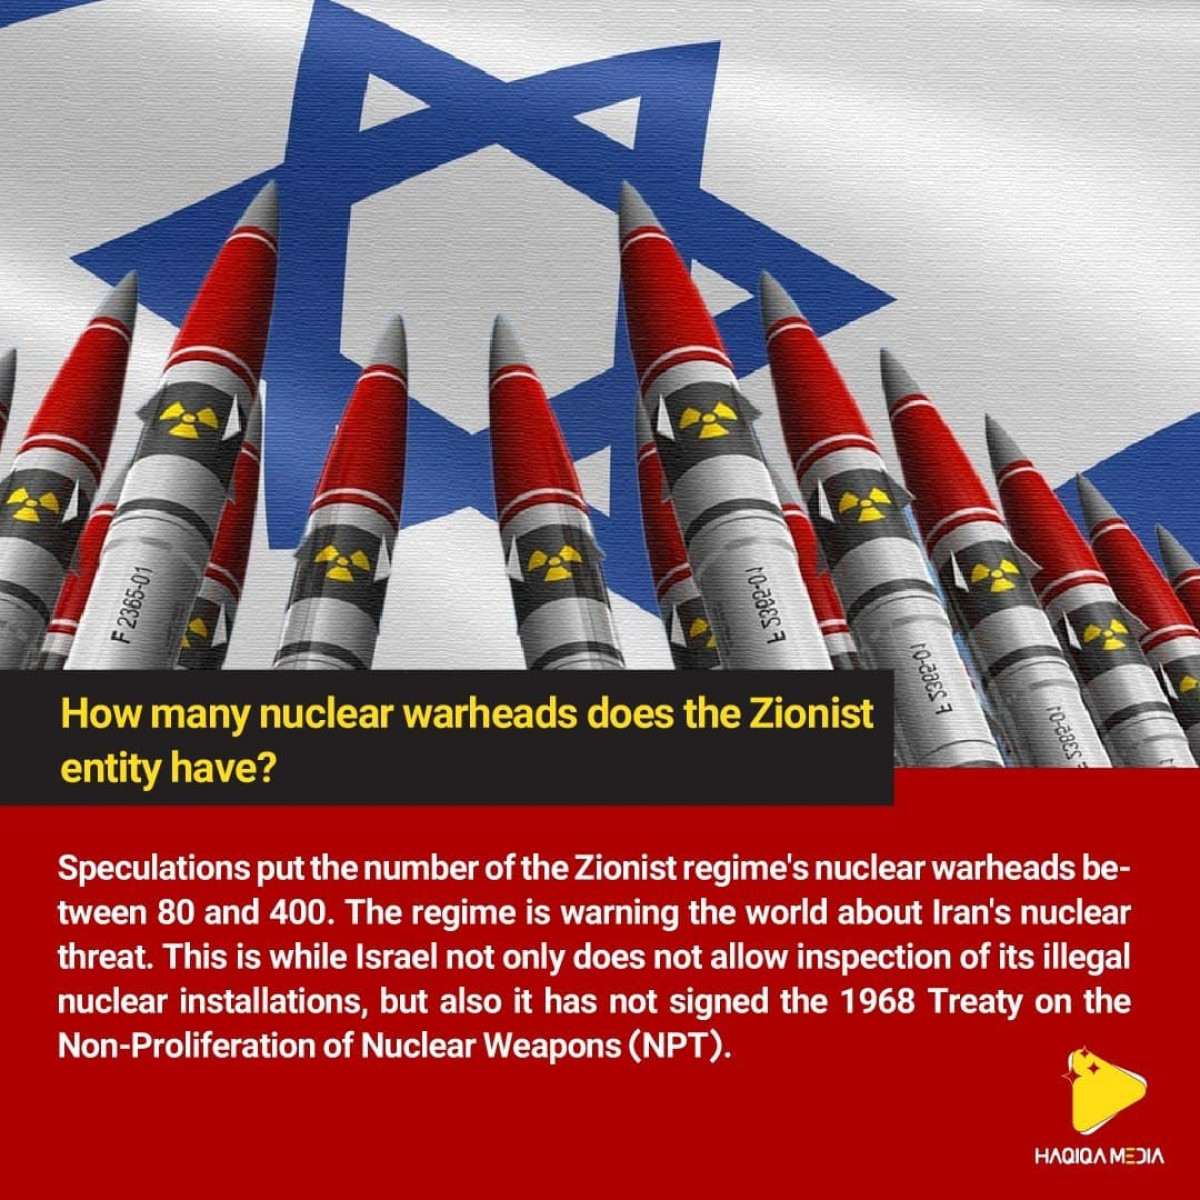 How many nuclear warheads does the Zionist entity have?